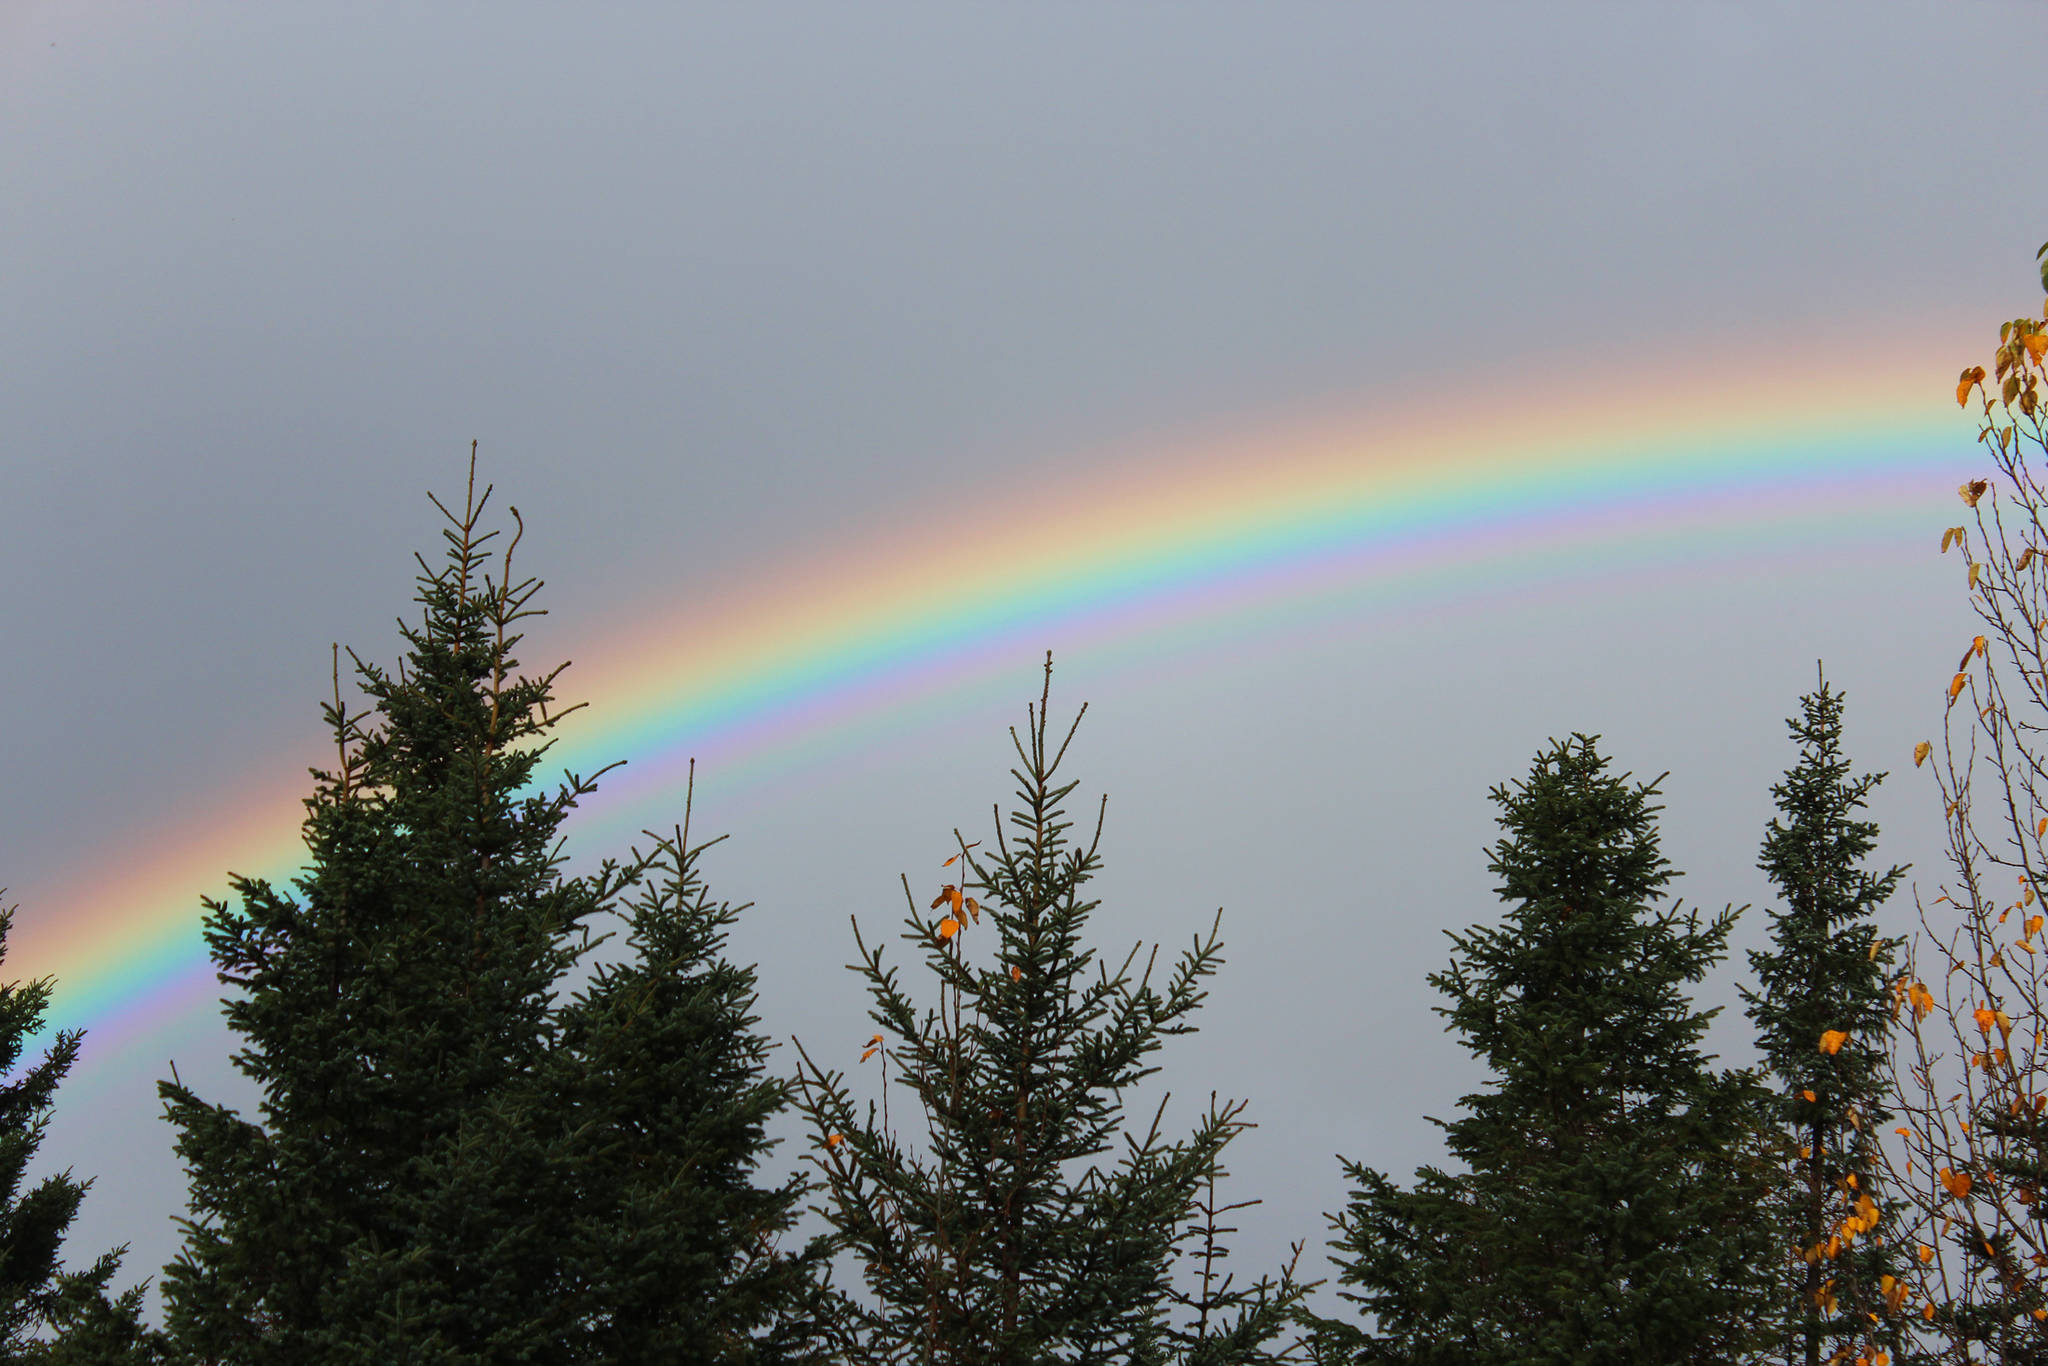 A rainbow peaks out from between the trees near the Homer News office on Tuesday, Oct. 16, 2018 in Homer, Alaska. A double rainbow was spotted in a few different places around town between periods of rain. (Photo by Megan Pacer/Homer News)